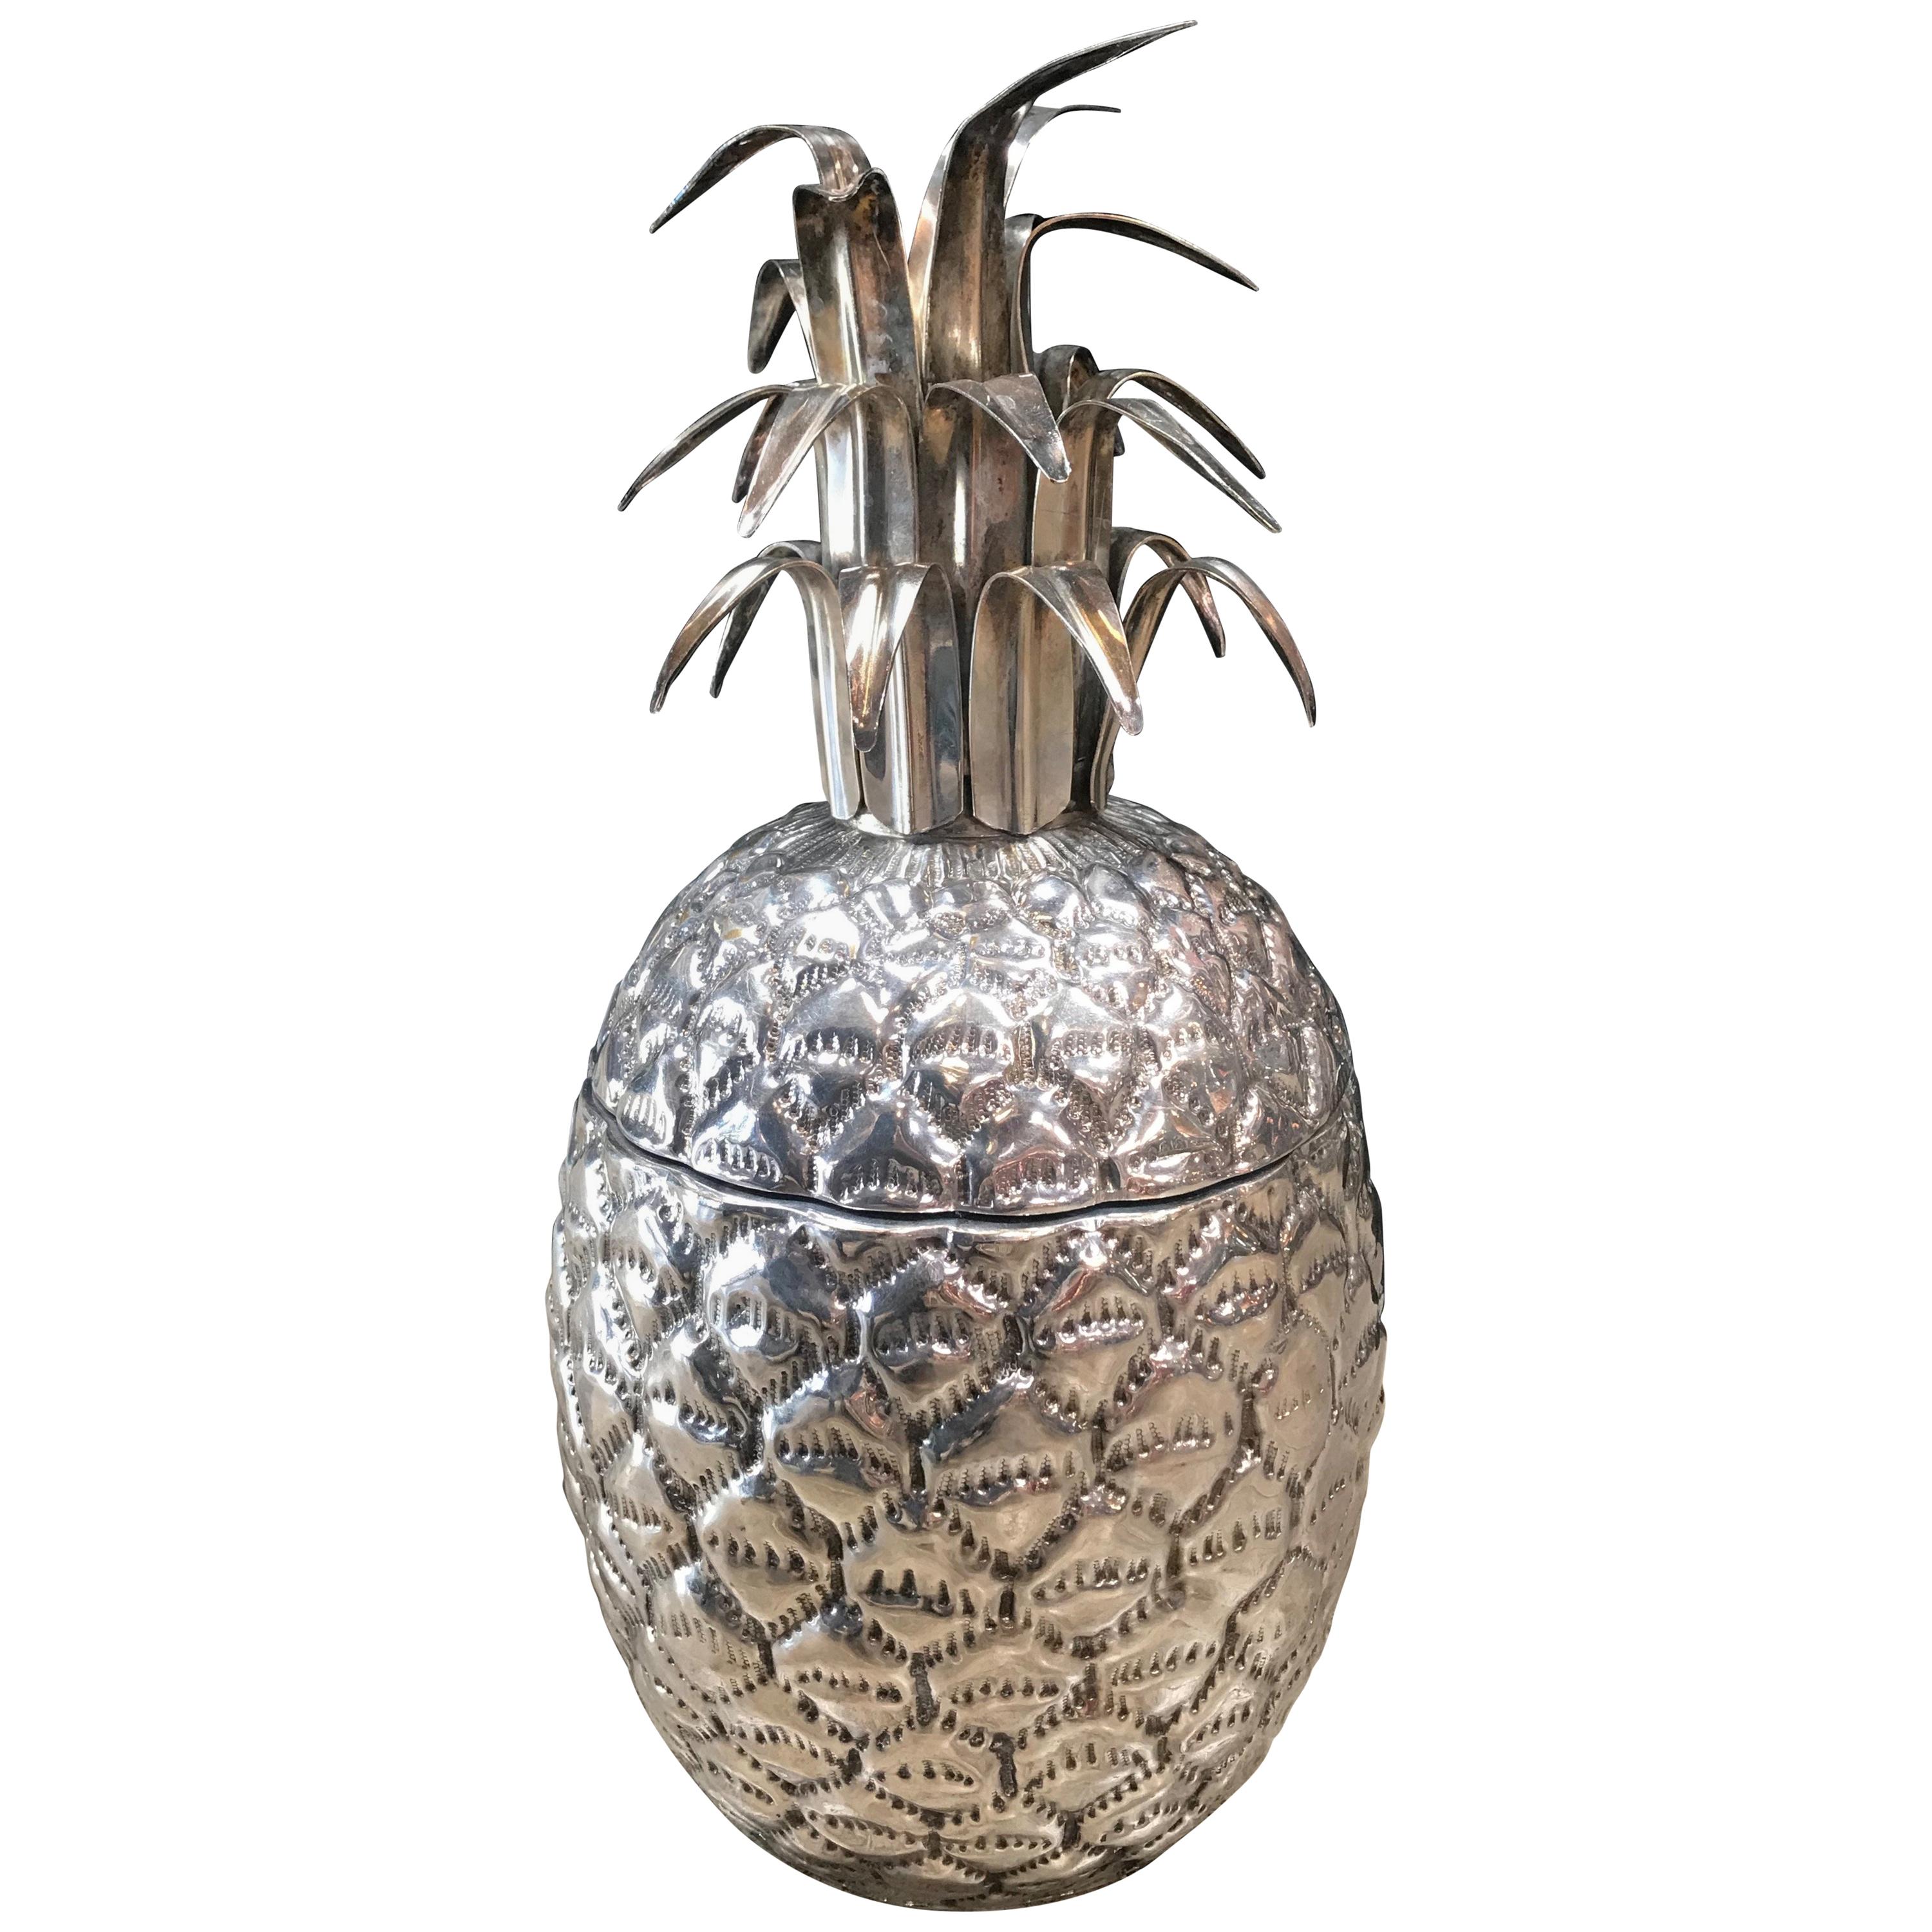 Silver Plated Pineapple Ice Bucket Made in Florence, Italy by Teghini